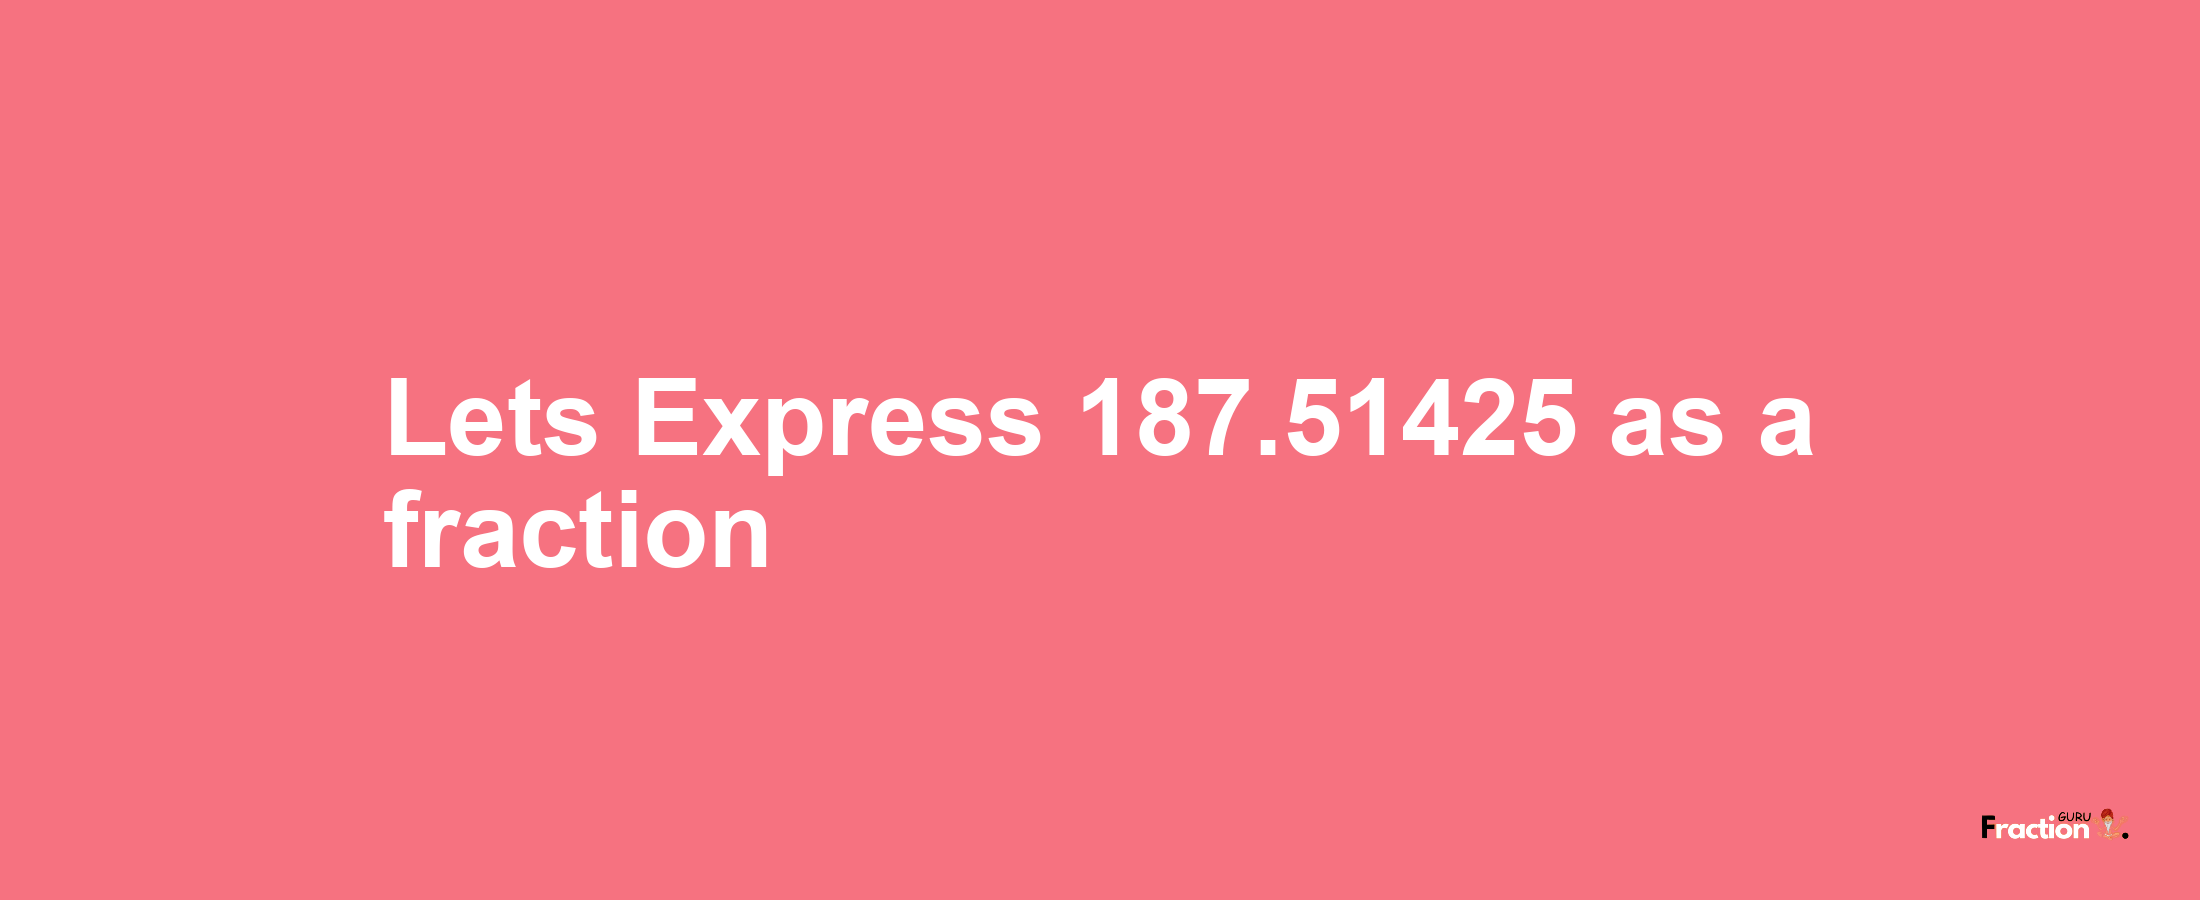 Lets Express 187.51425 as afraction